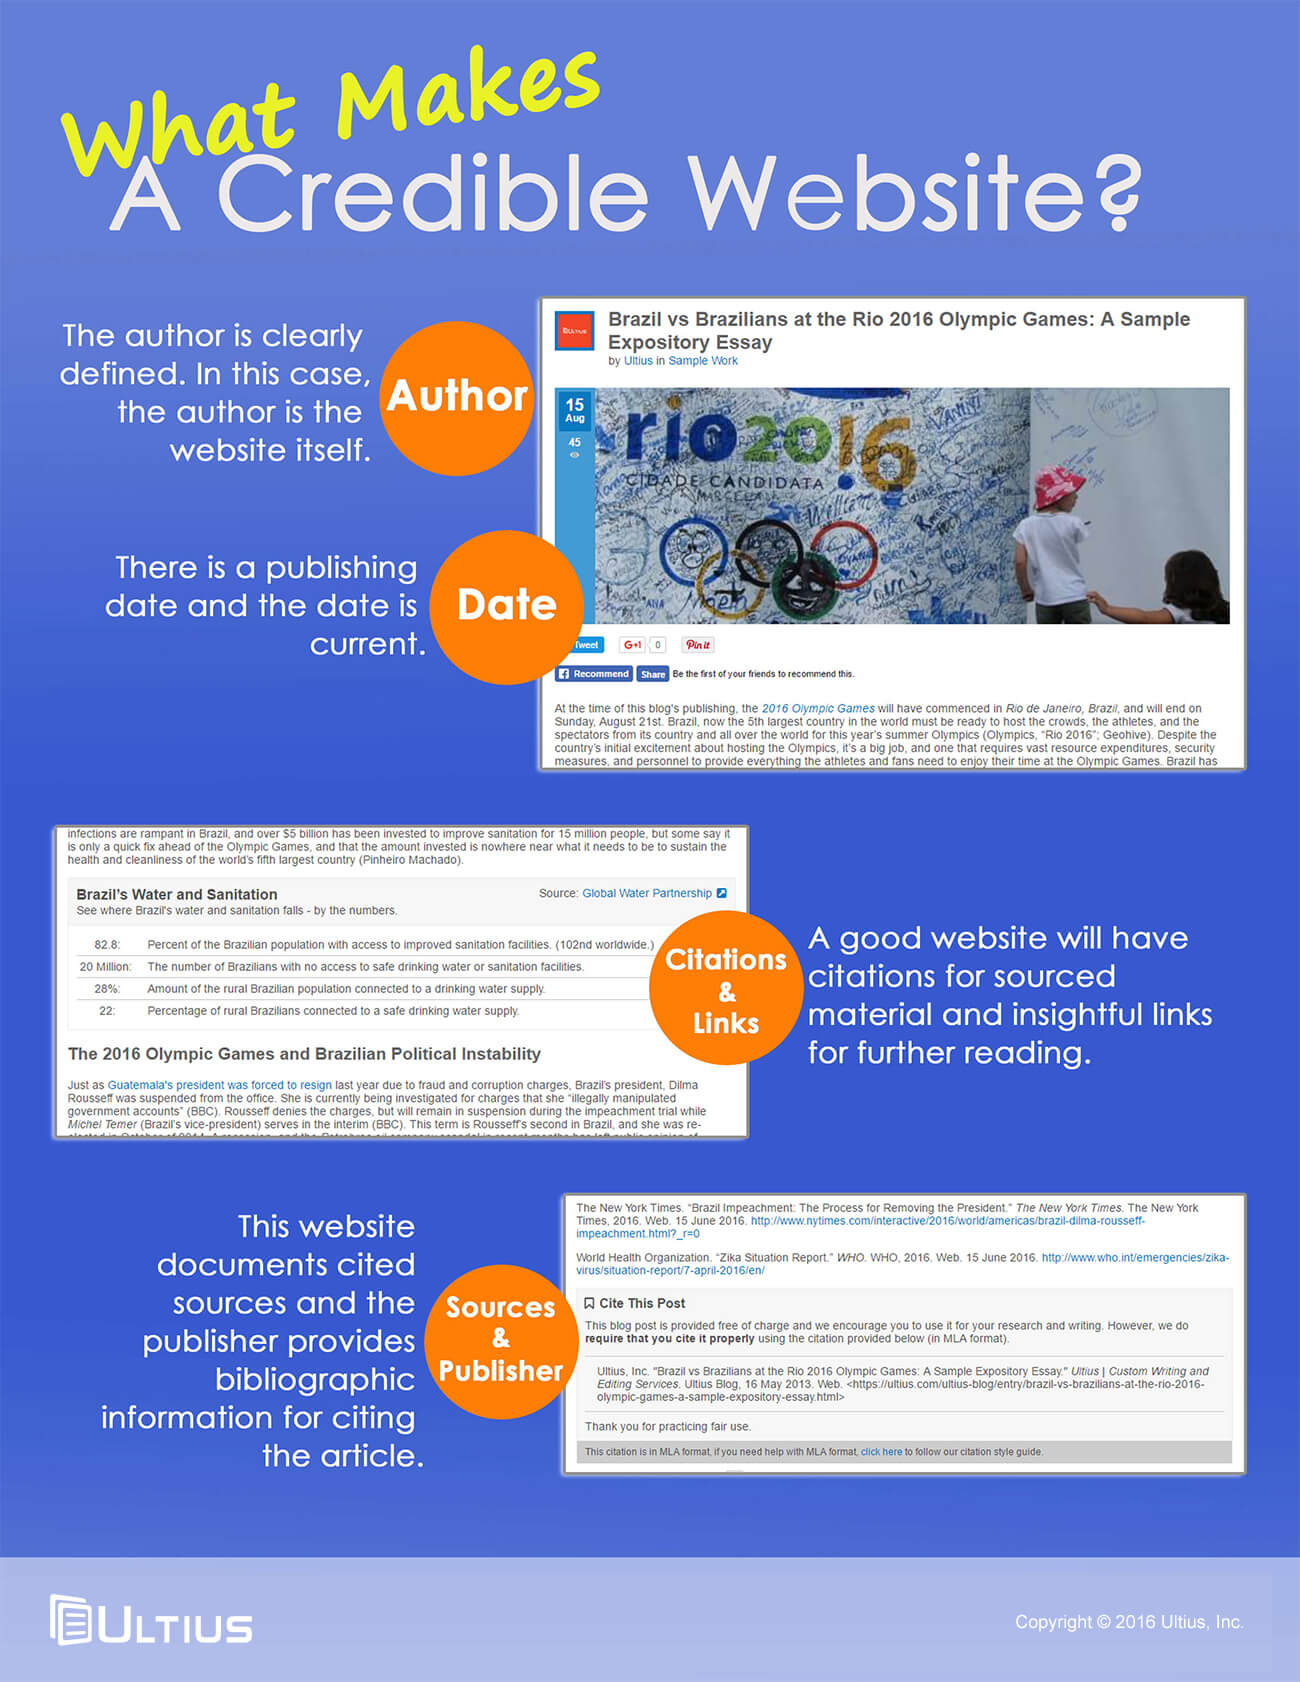 What Makes a Credible Website?